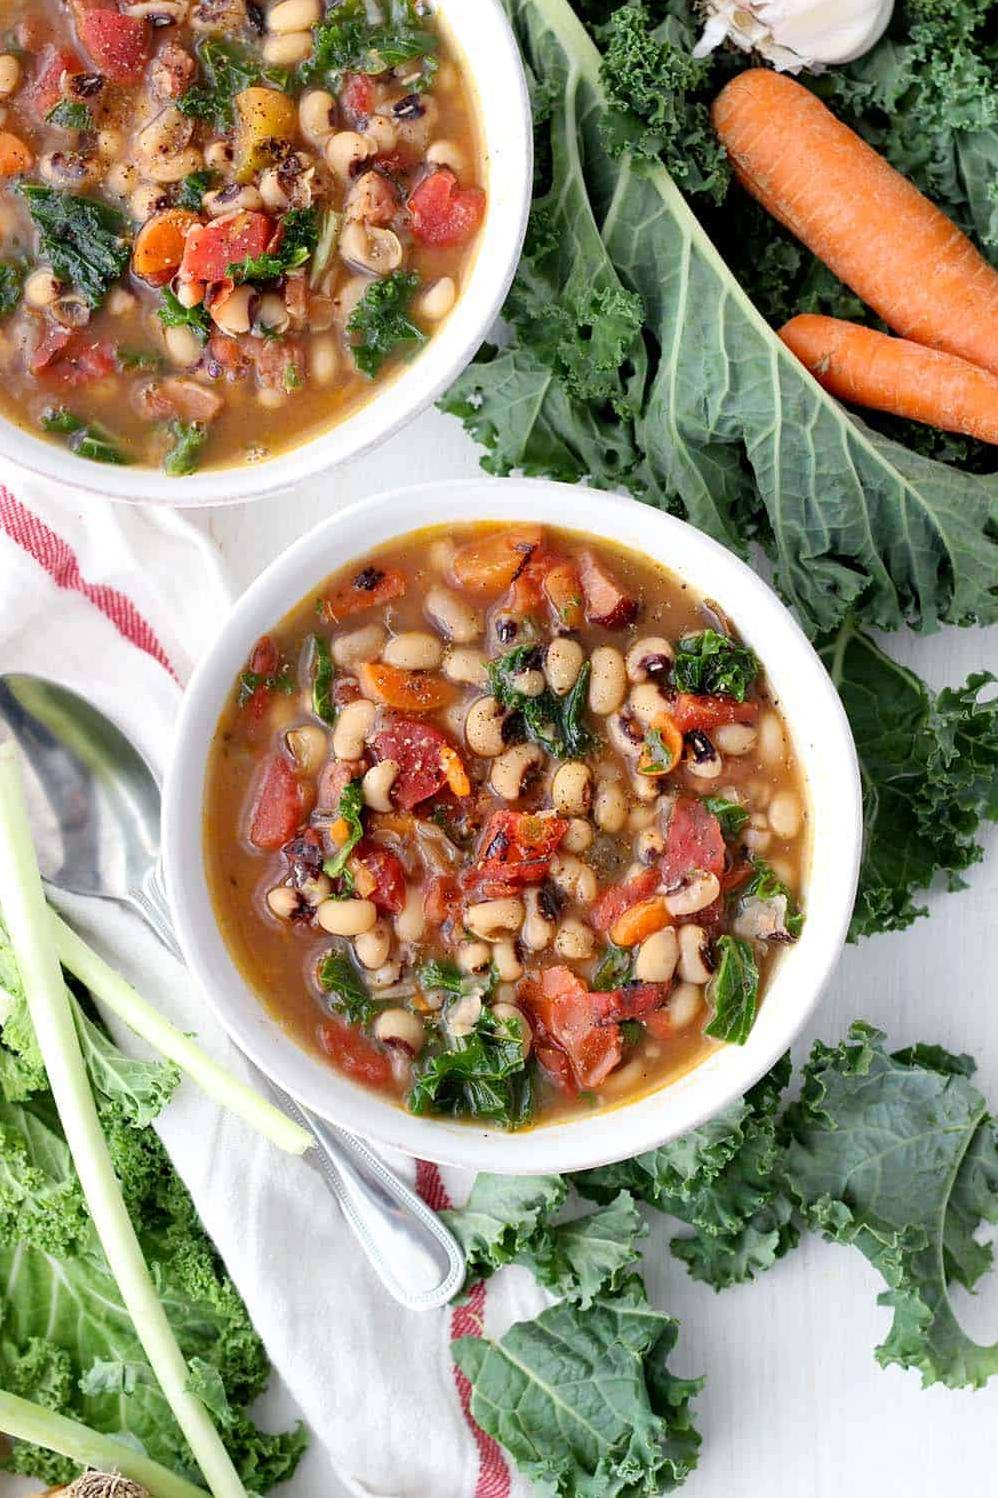  Satisfy your taste buds with this Instant Pot Black Eyed Pea Soup!